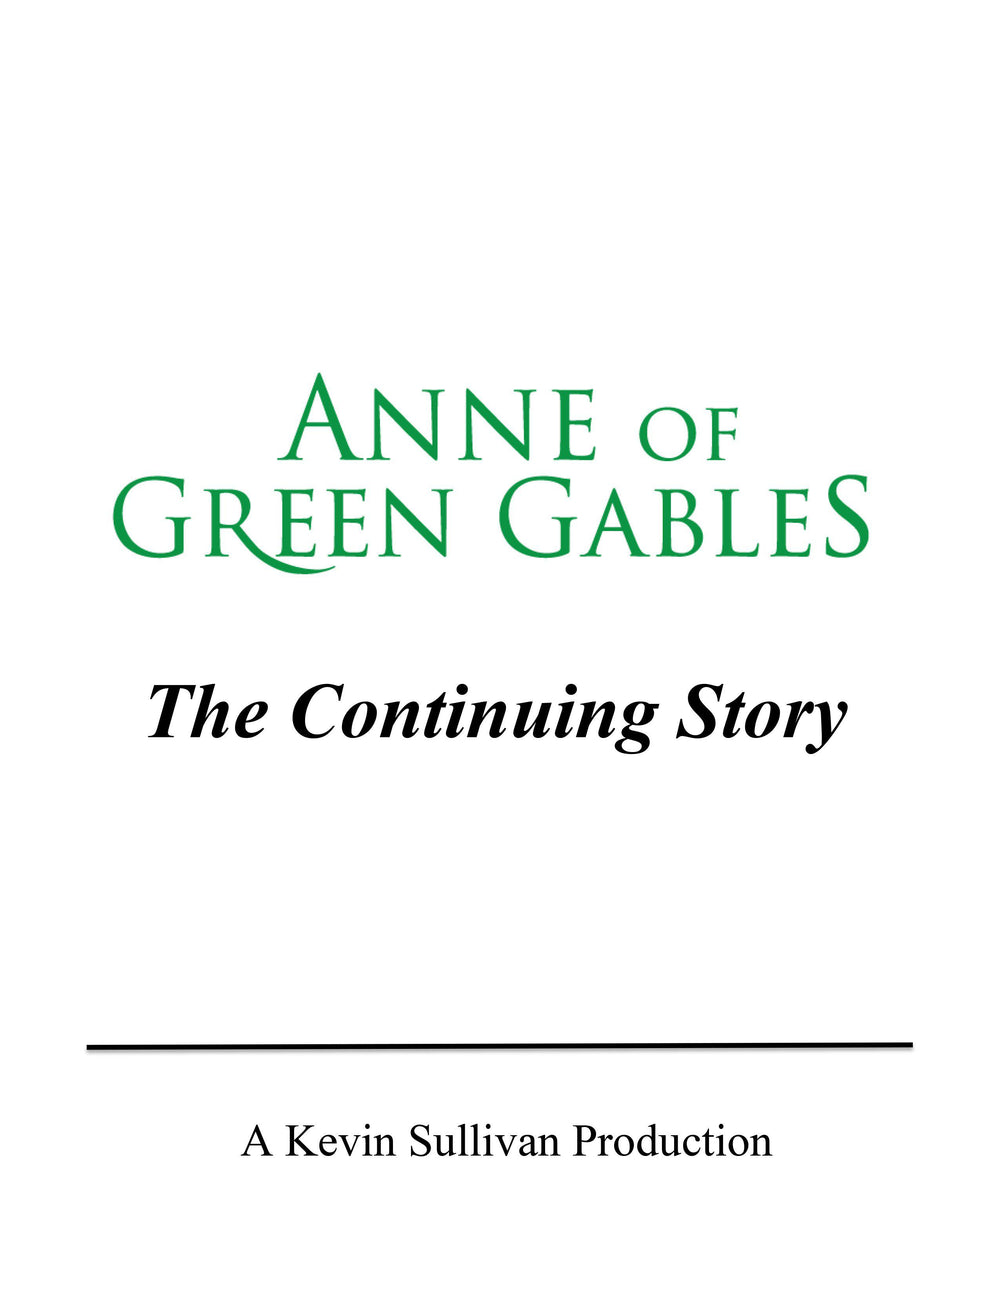 Anne of Green Gables: The Continuing Story Autographed Screenplay